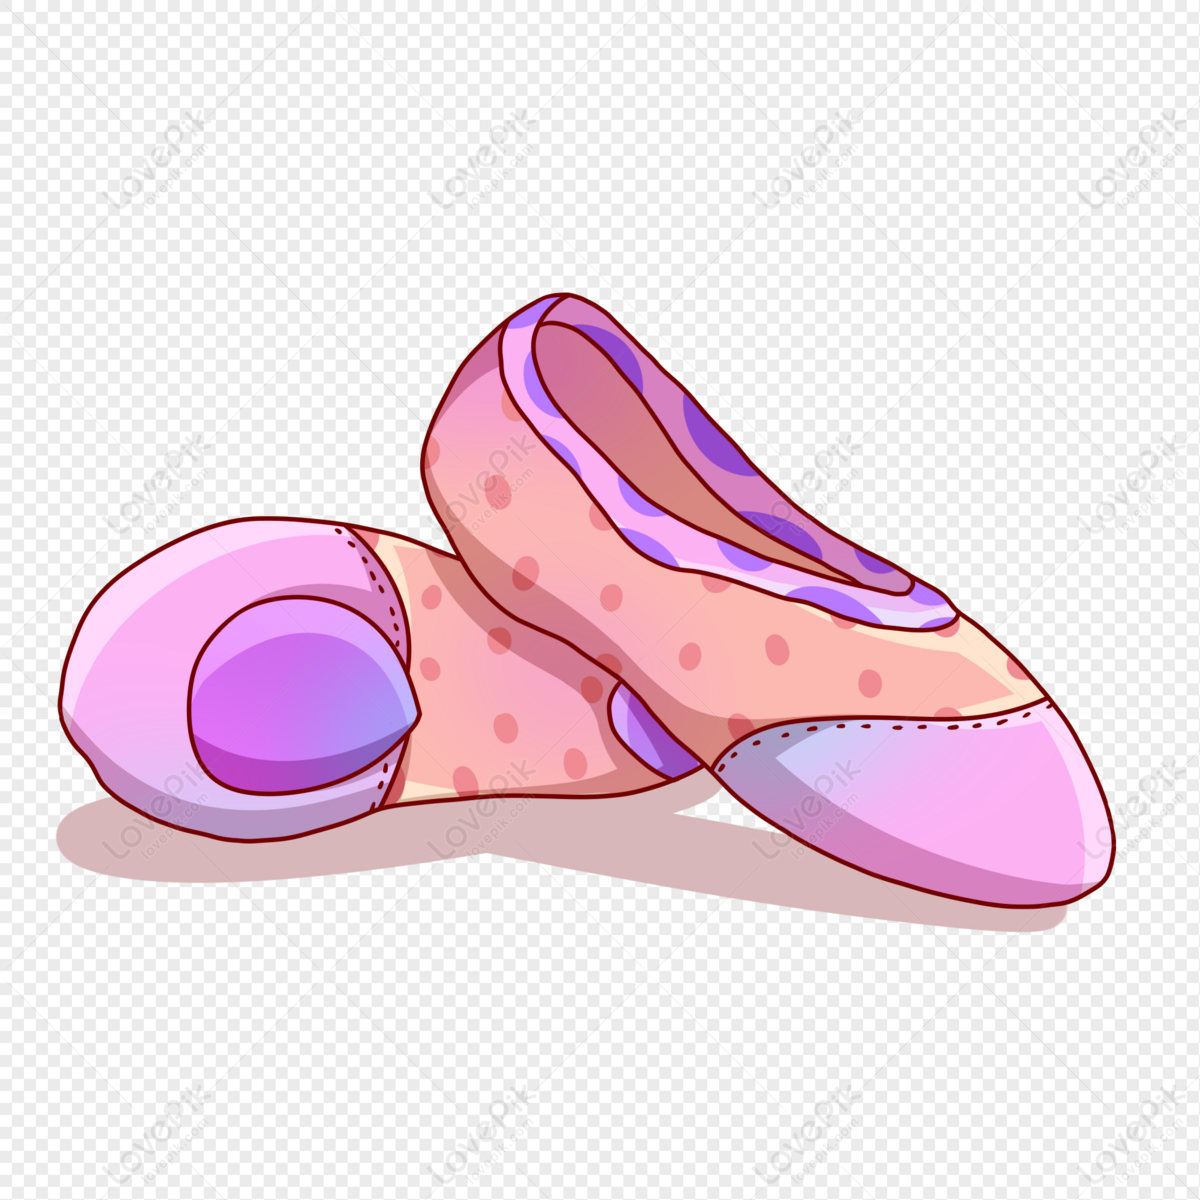 Cartoon Pink Purple Dance Shoes Free PNG And Clipart Image For Free  Download - Lovepik | 401551619